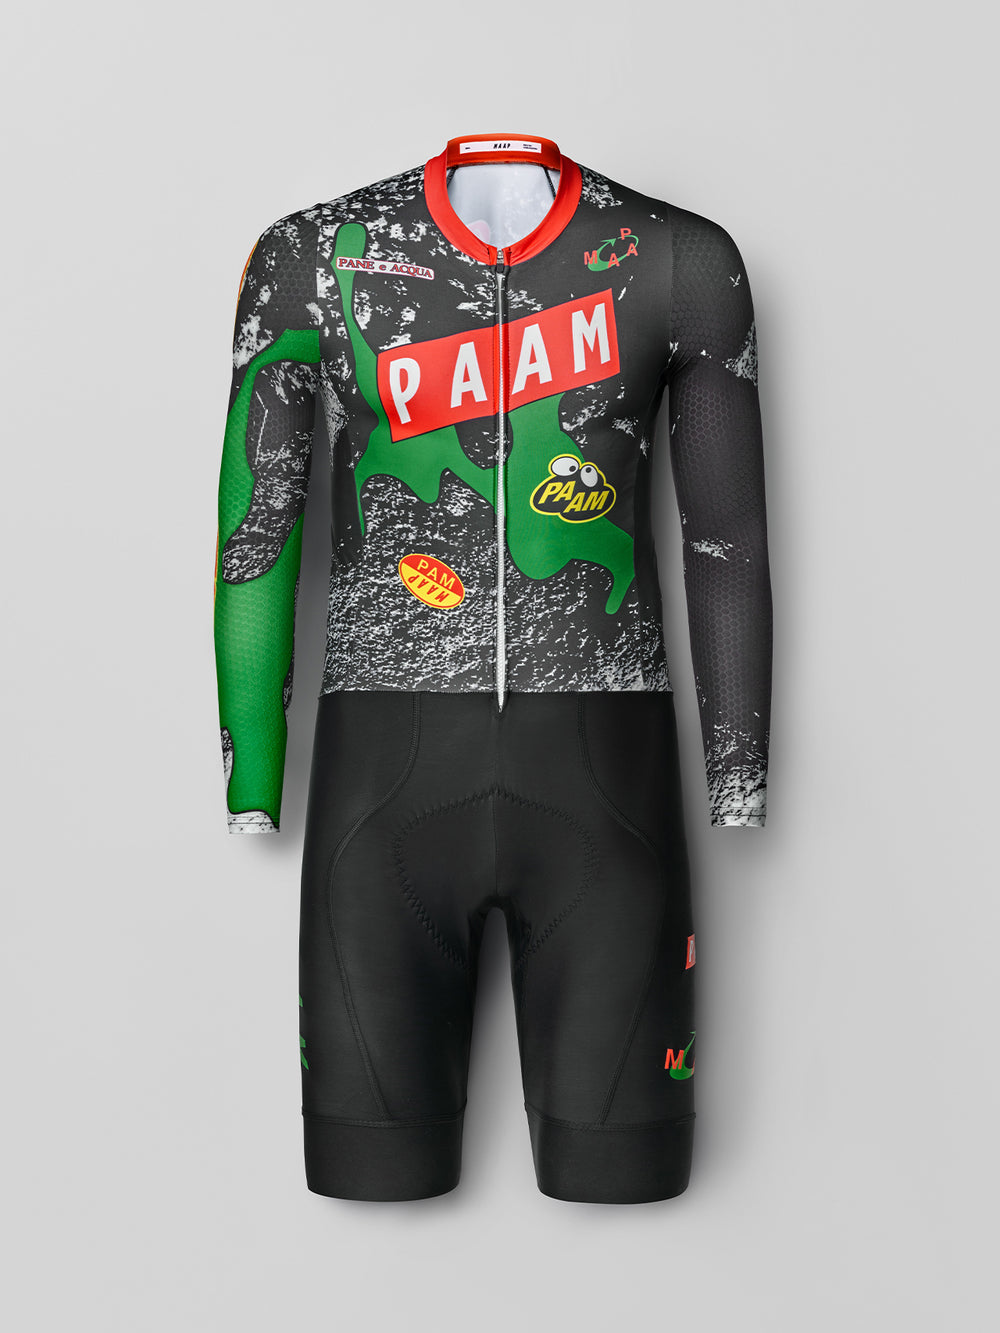 Product Image for MAAP x PAM Skin Suit